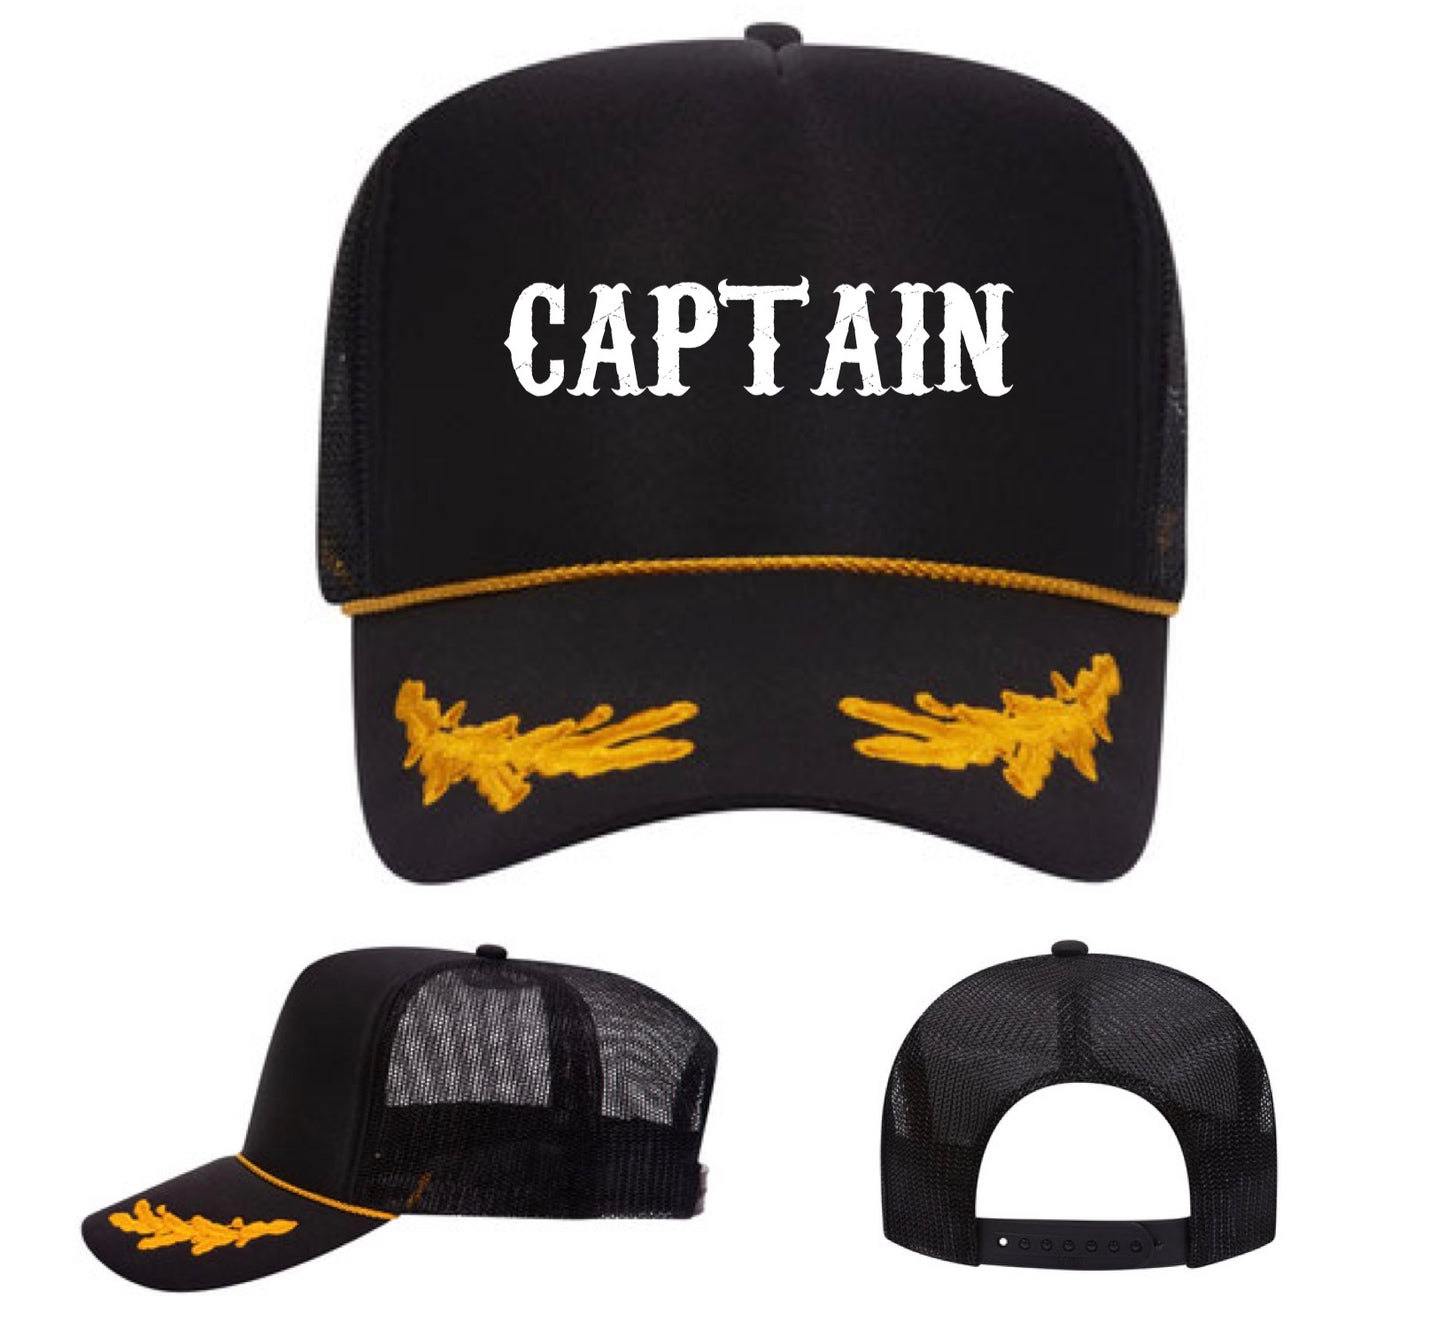 Captain and First Mate Hat (FREE Shipping)